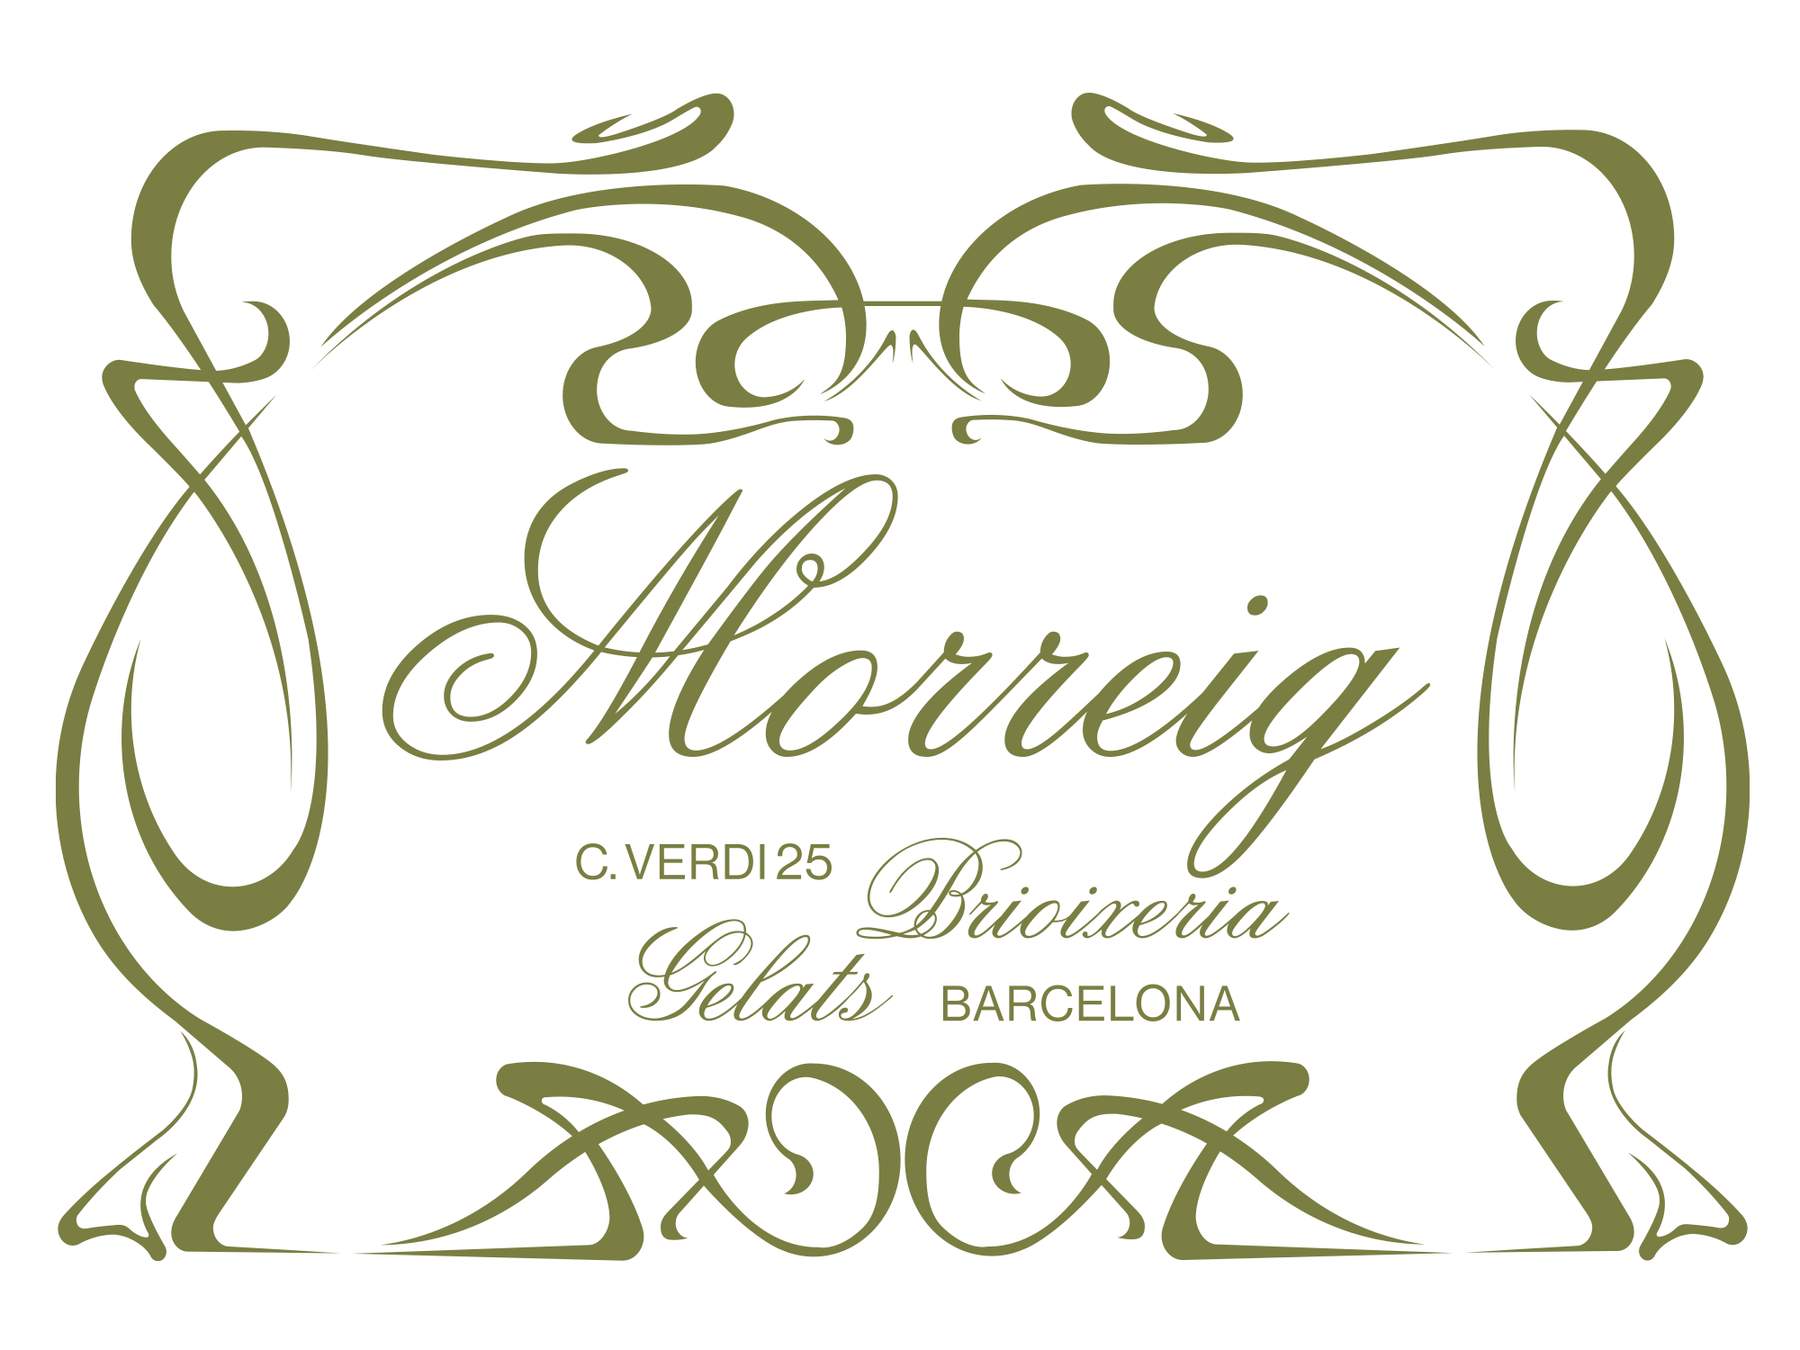 Morreig by Ingrid Picanyol